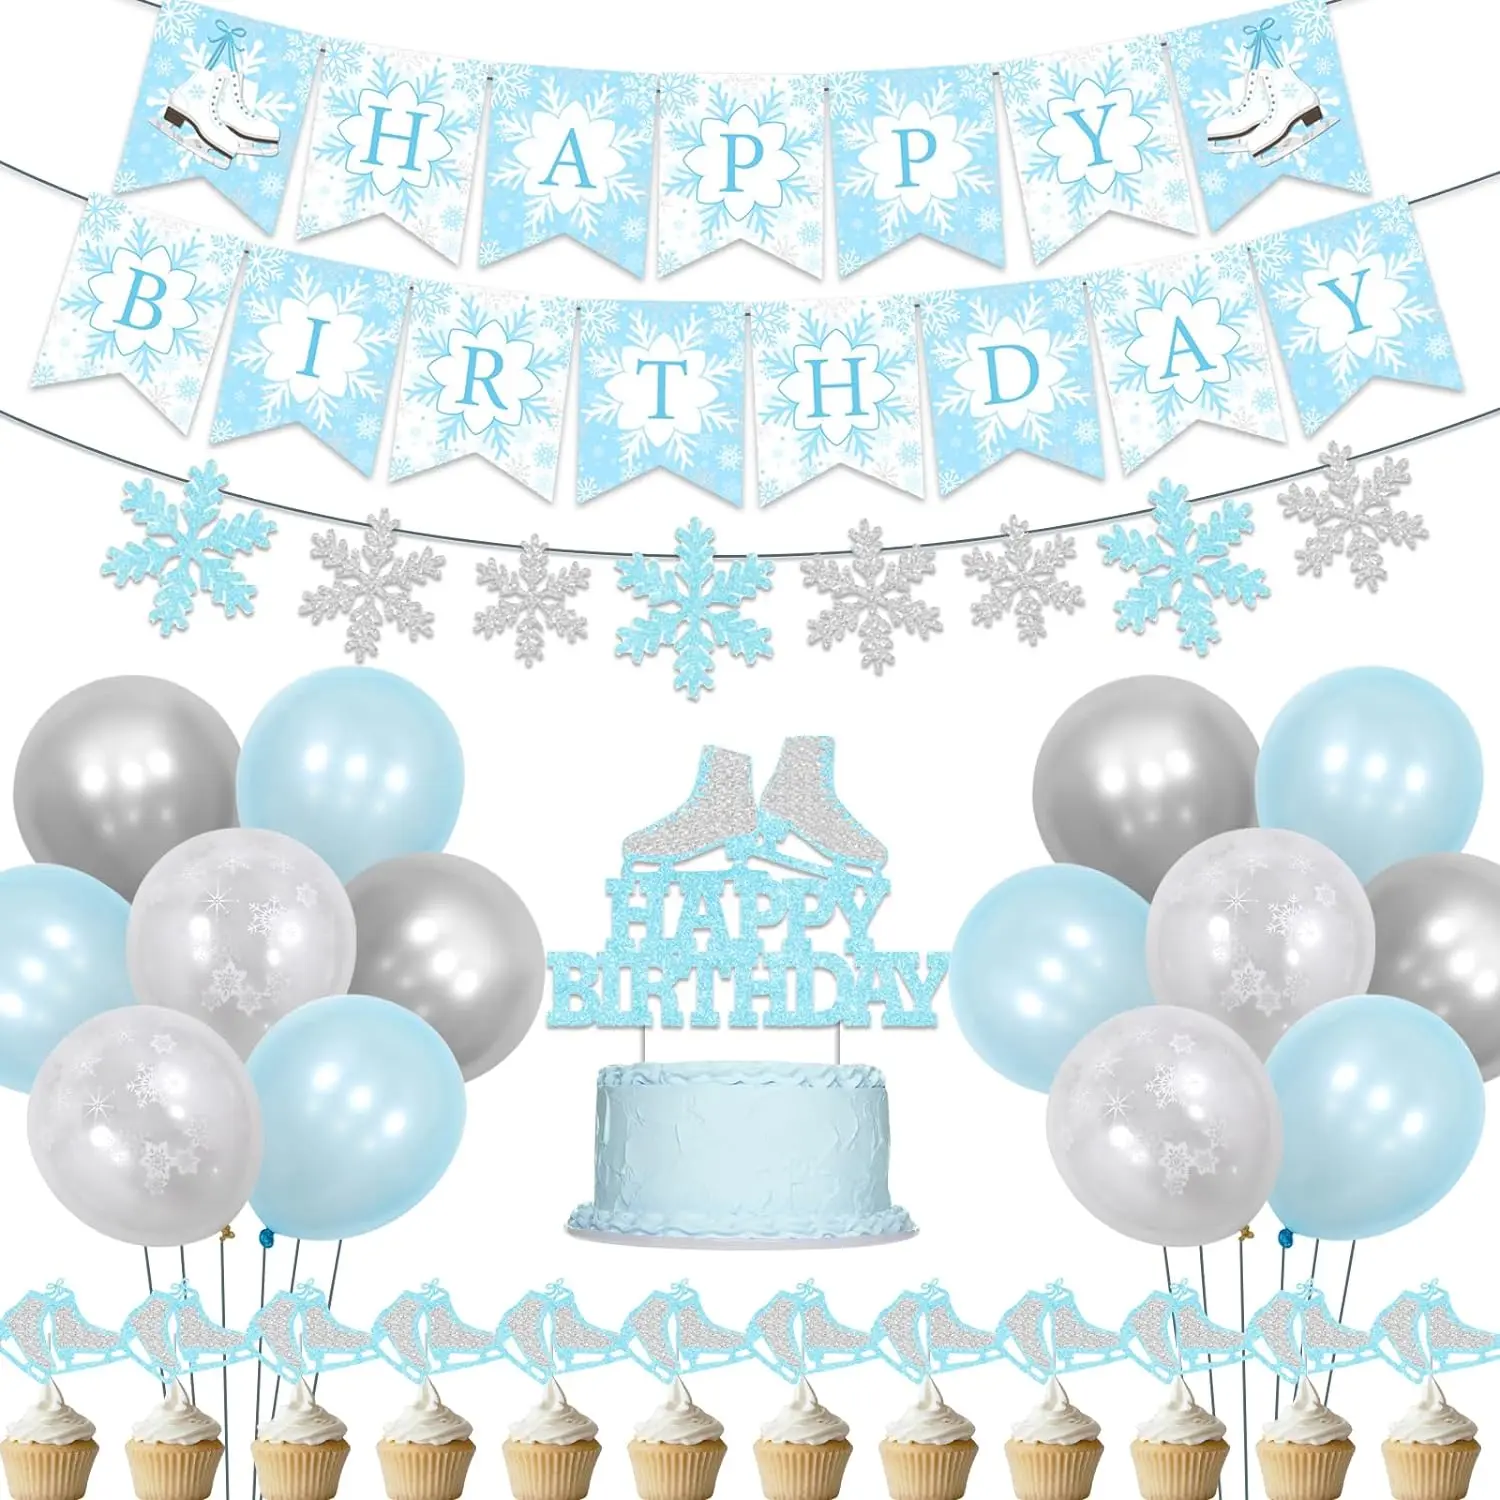 

Ice Skating Birthday Party Decor Snowflake Garland Happy Birthday Banner Balloons Cupcake Toppers for Winter Birthday Party